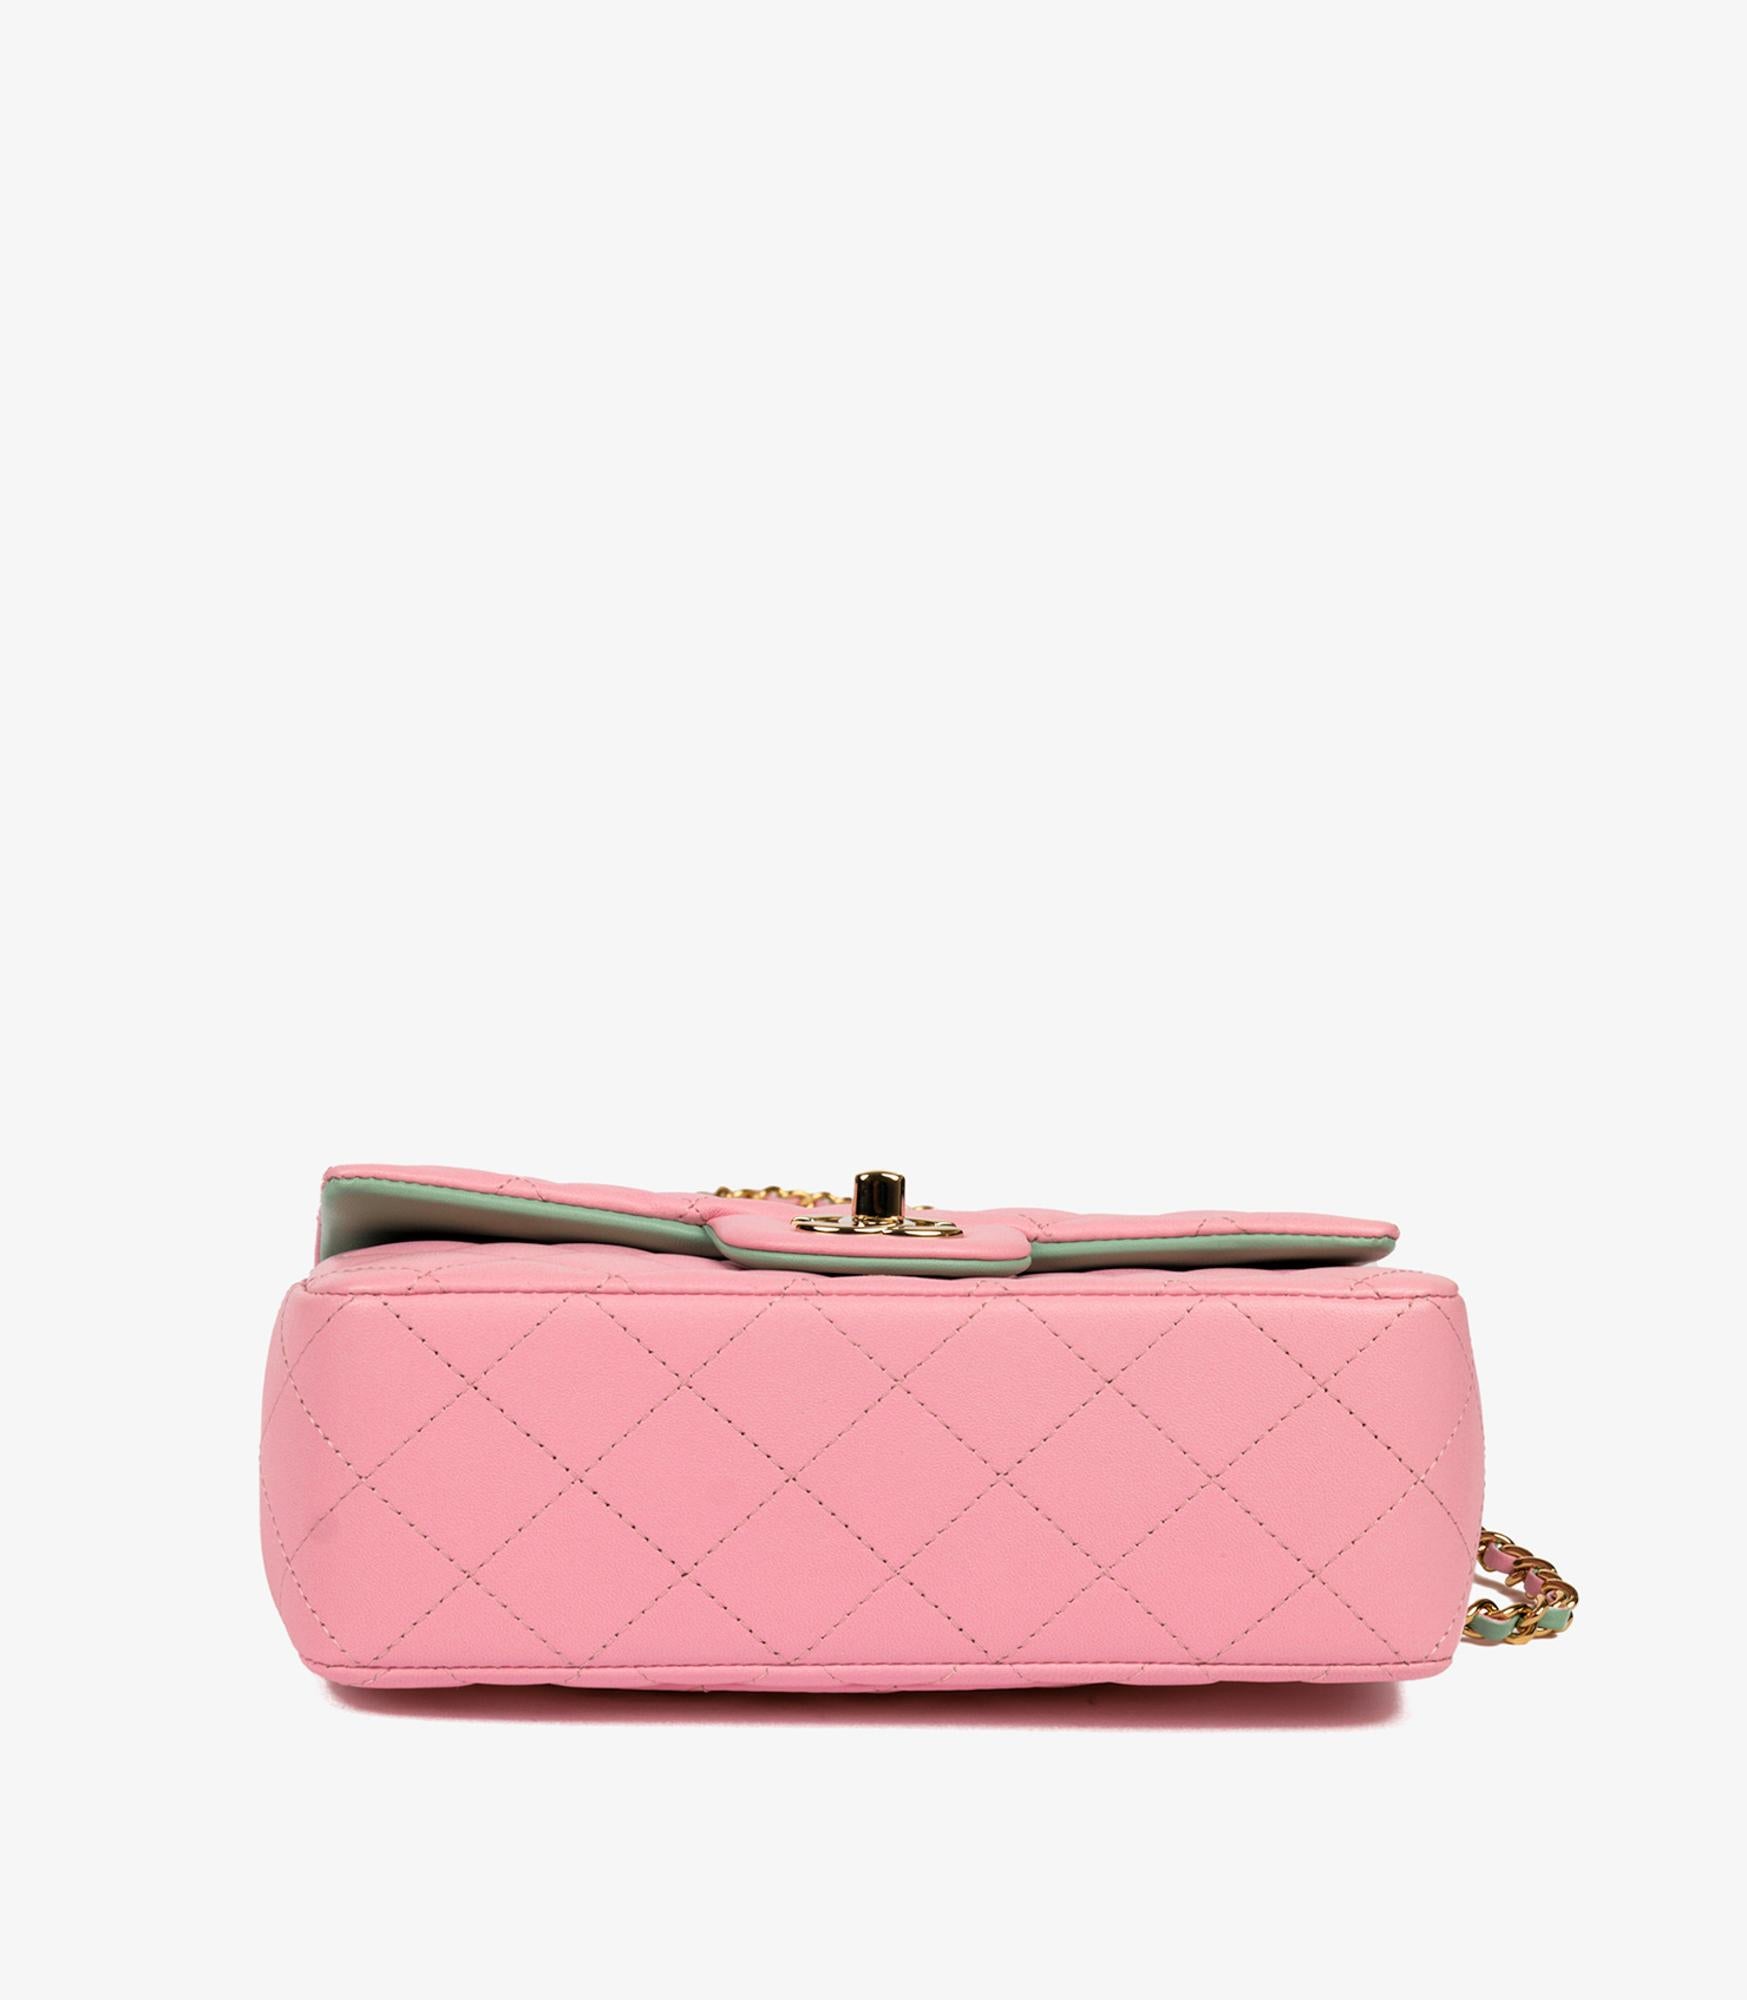 Chanel Pink & Green Quilted Lambskin Rectangular Mini Flap Bag With Top Handle For Sale 1